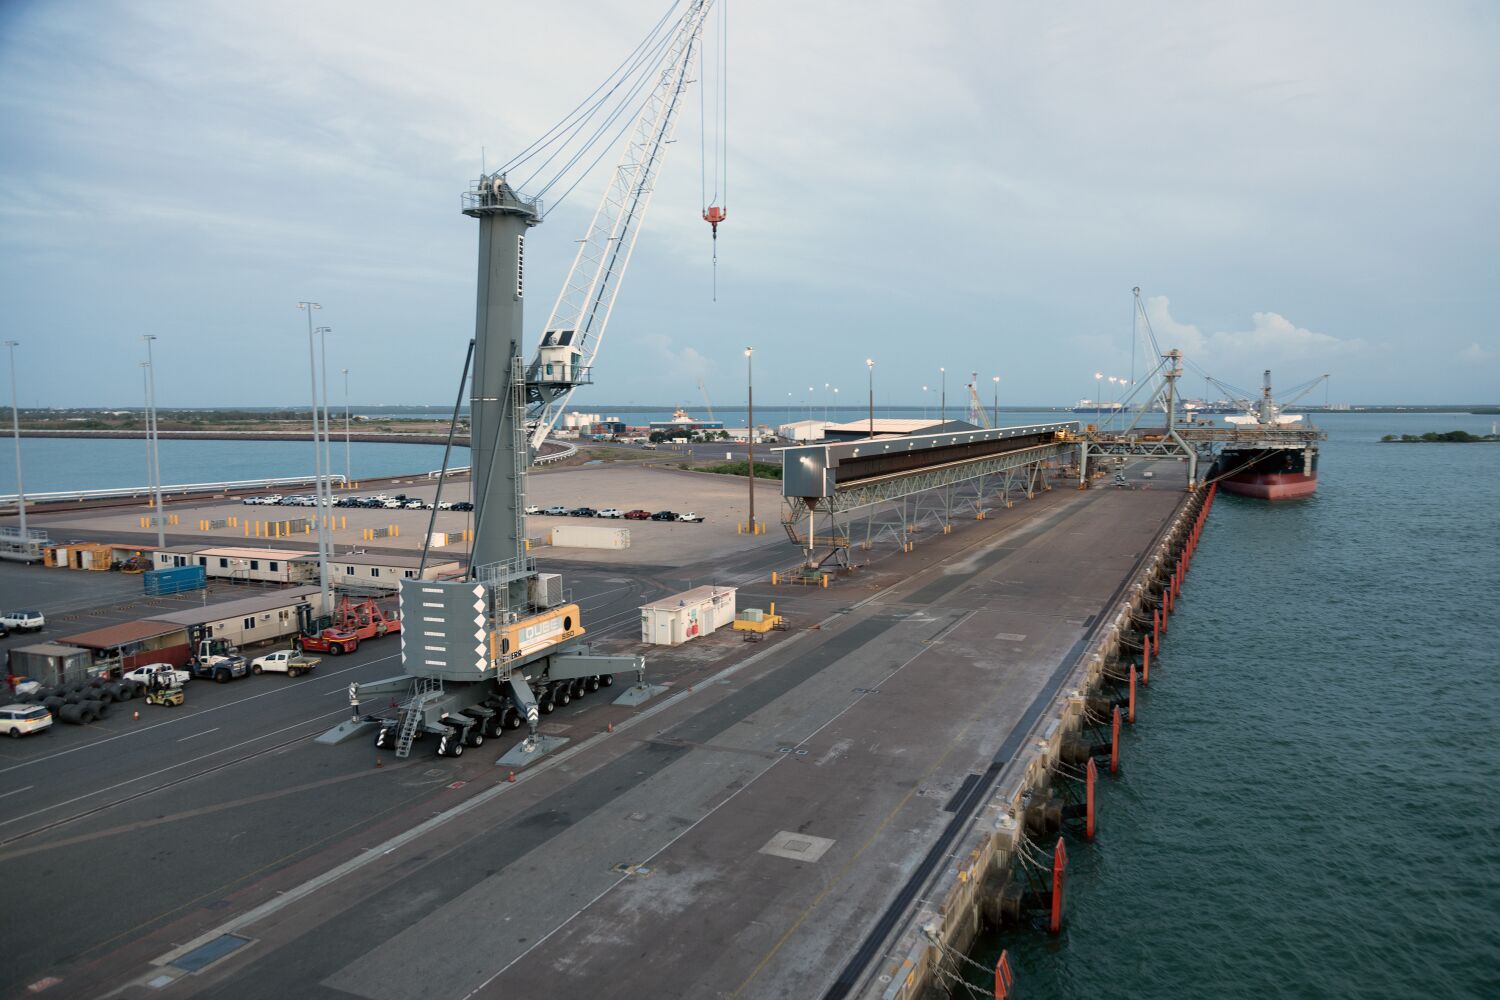 The U.S. military has big plans for an Australian port. So does the Chinese firm that controls it